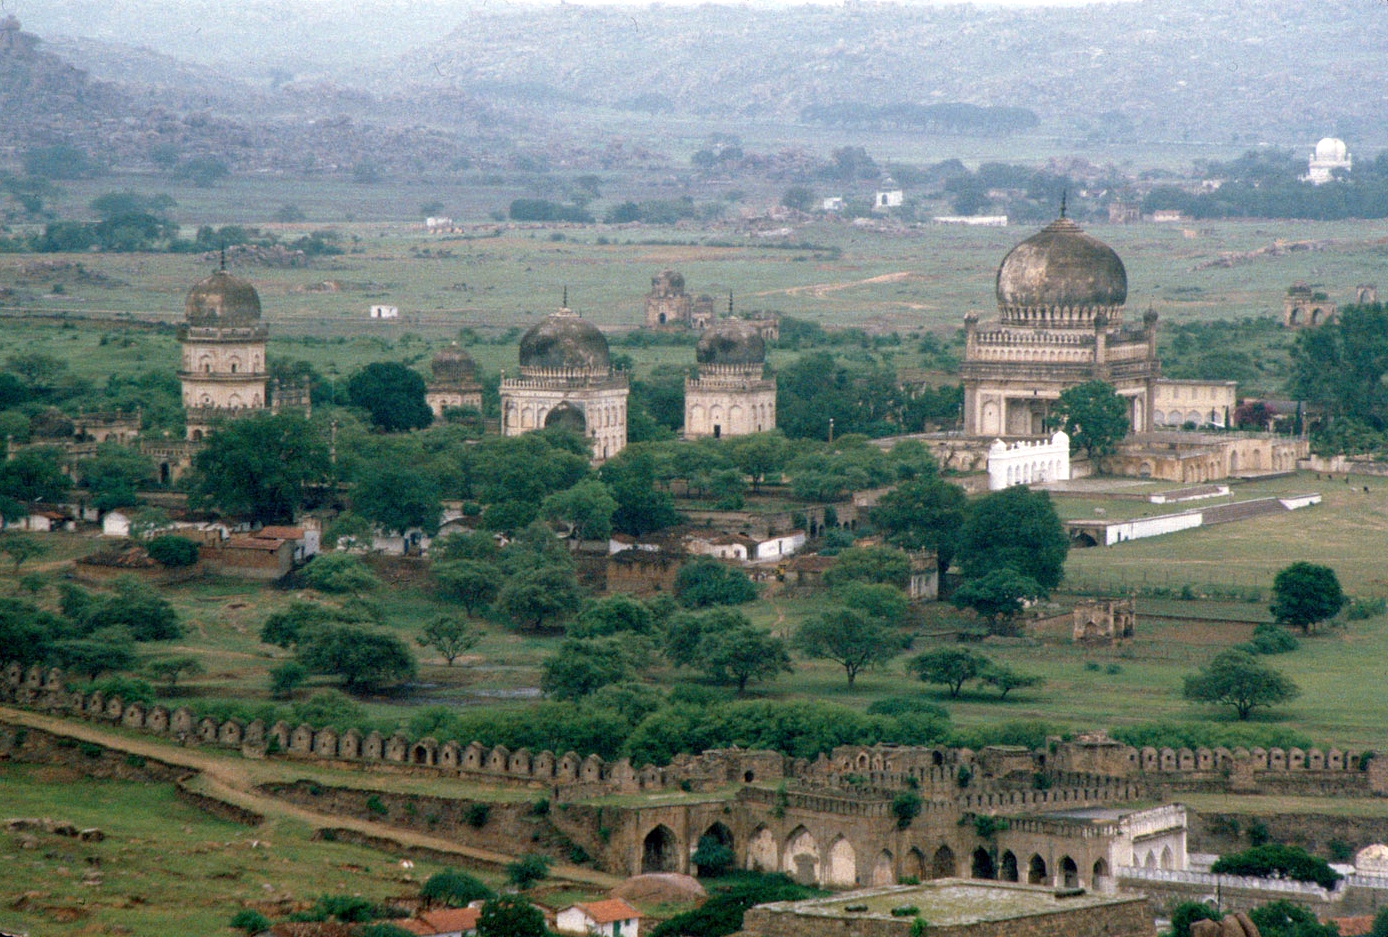 Qutb Shahi Royal Tombs - View of Golconda Fort wall in foreground, tombs in distance